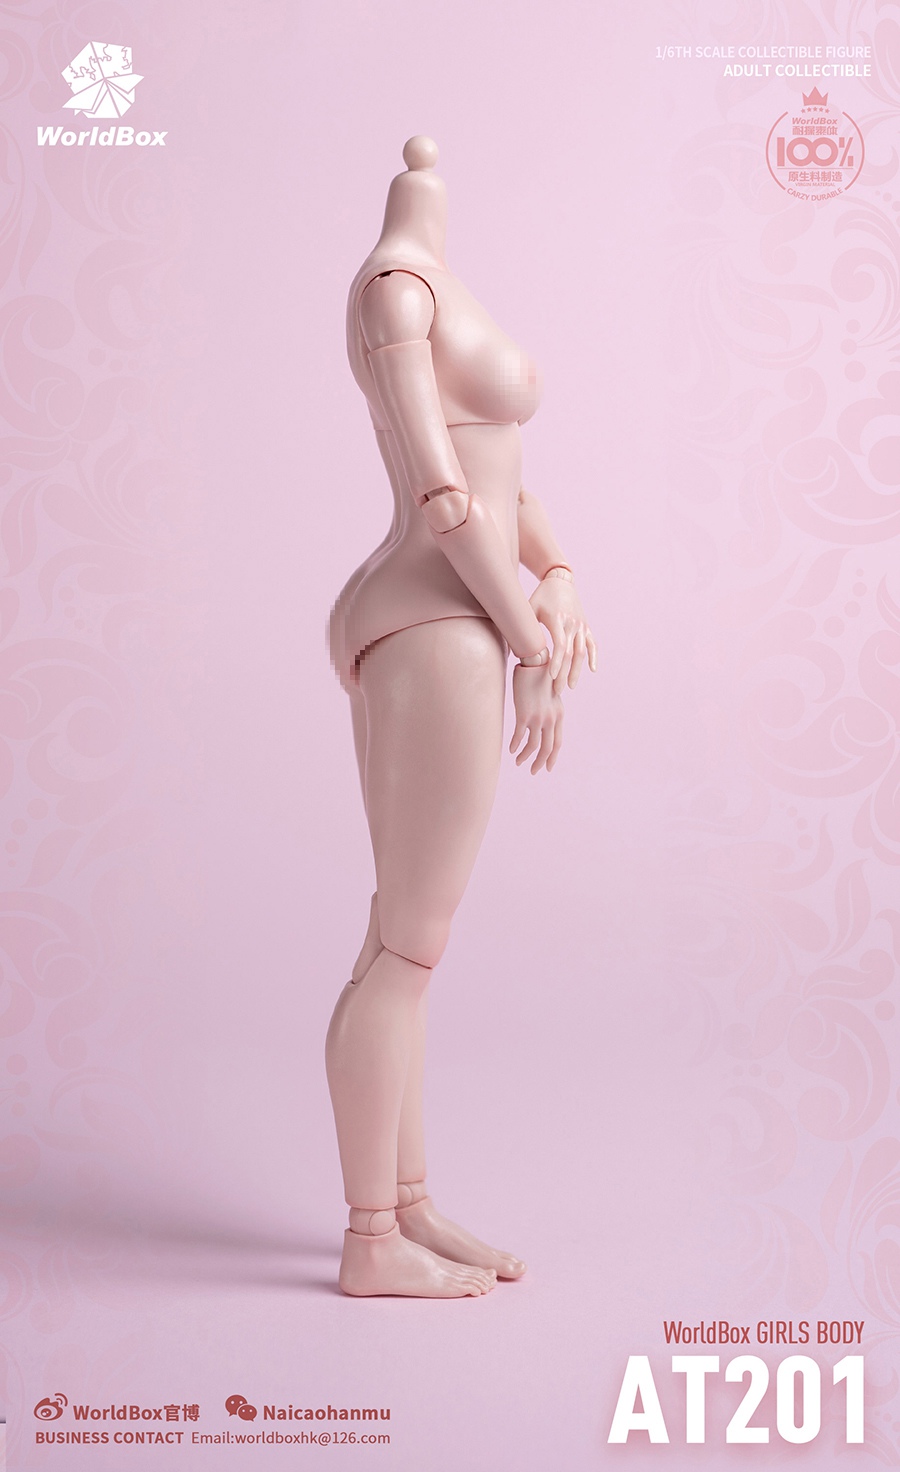 Worldbox GIRLS BODY (jointed female figure) at201/202 Fig410